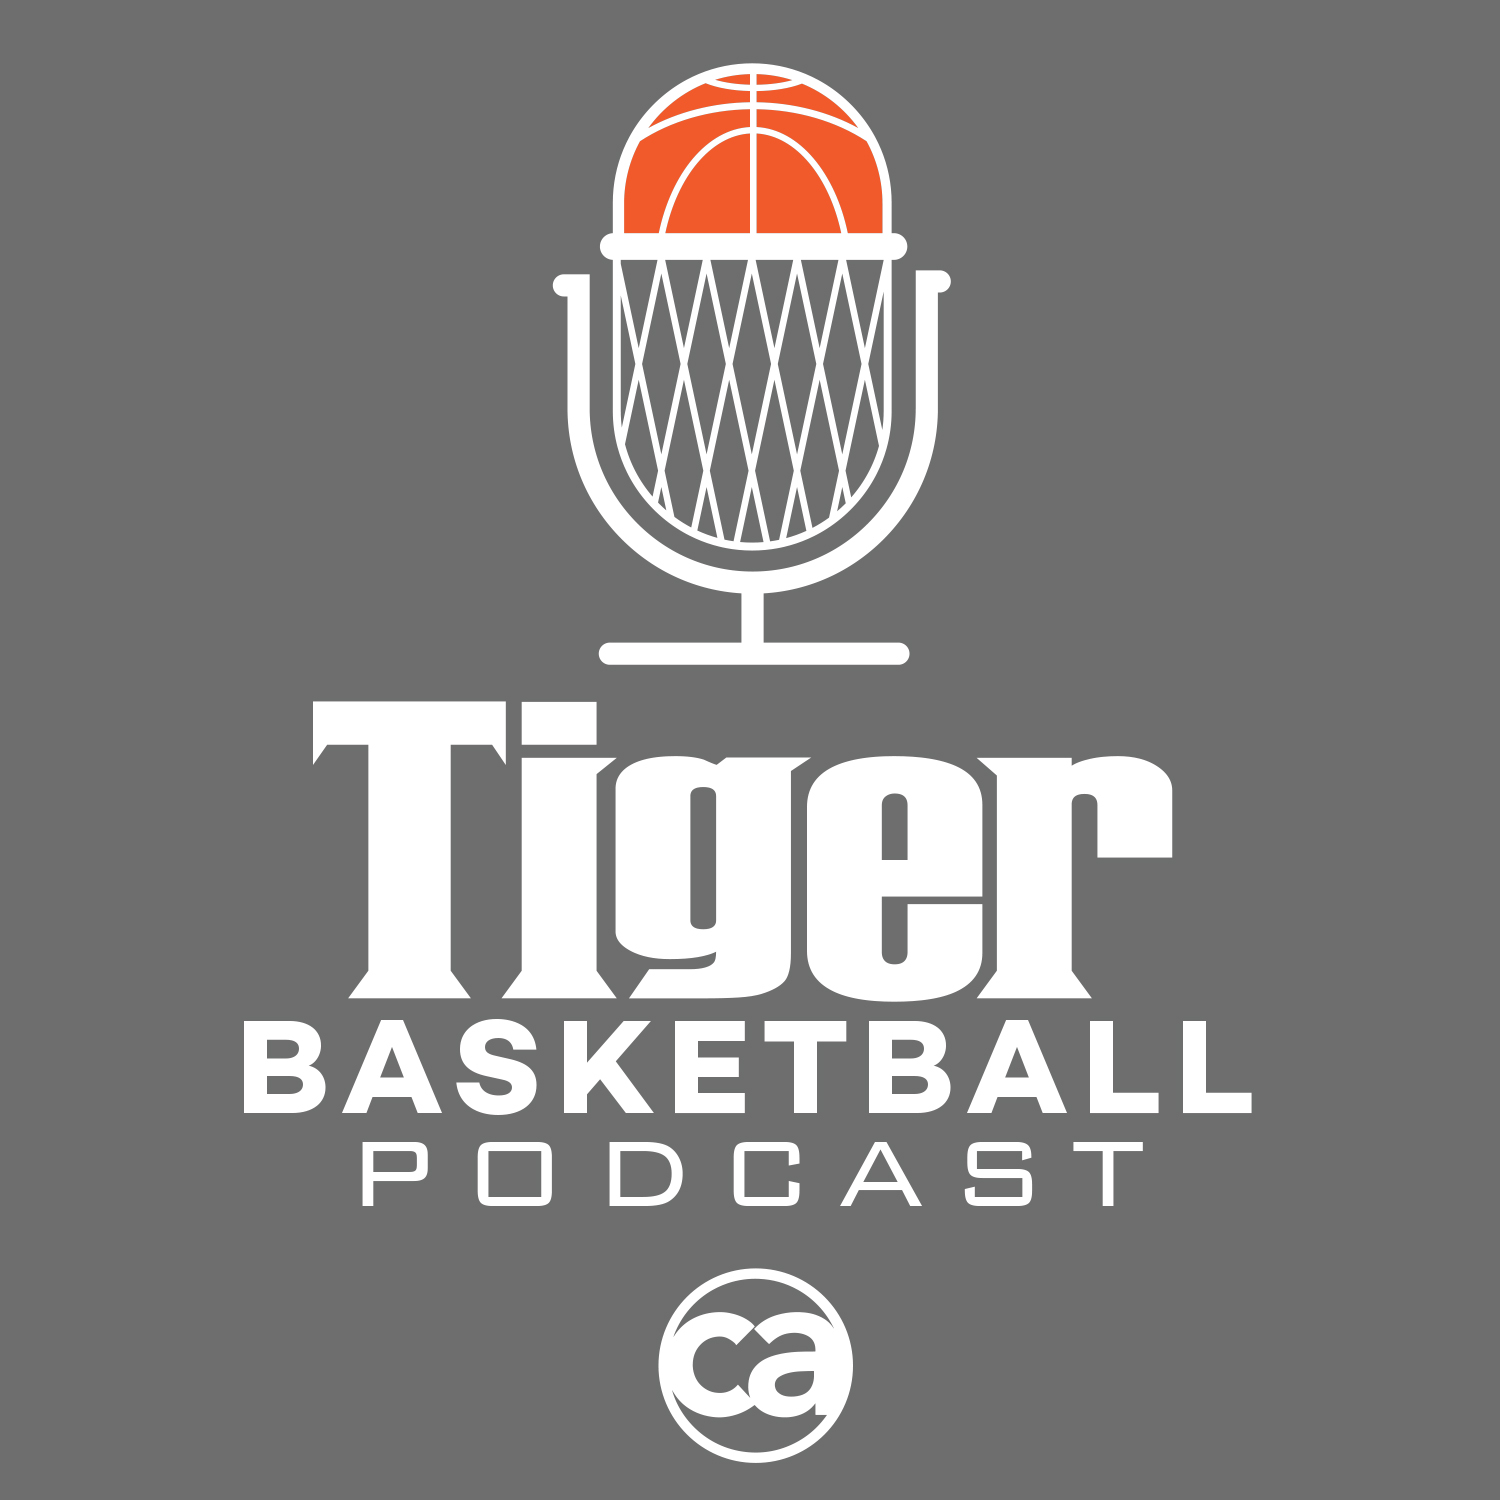 Penny Hardaway has the Tigers positioned to be the sport's biggest story